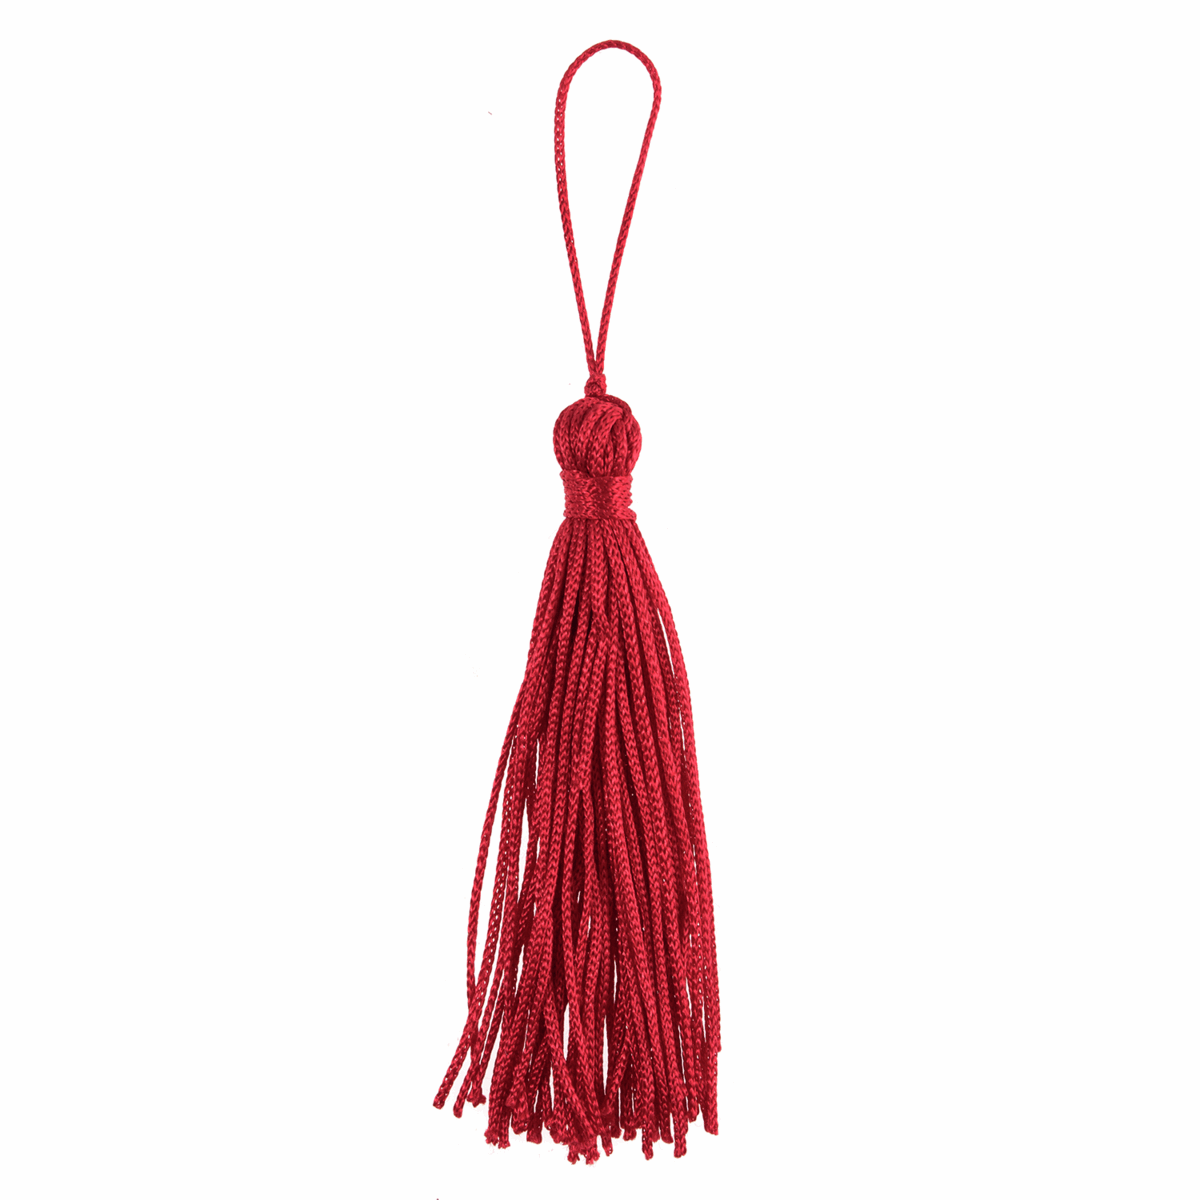 Trimits Red Tassels - 13cm (Pack of 10)